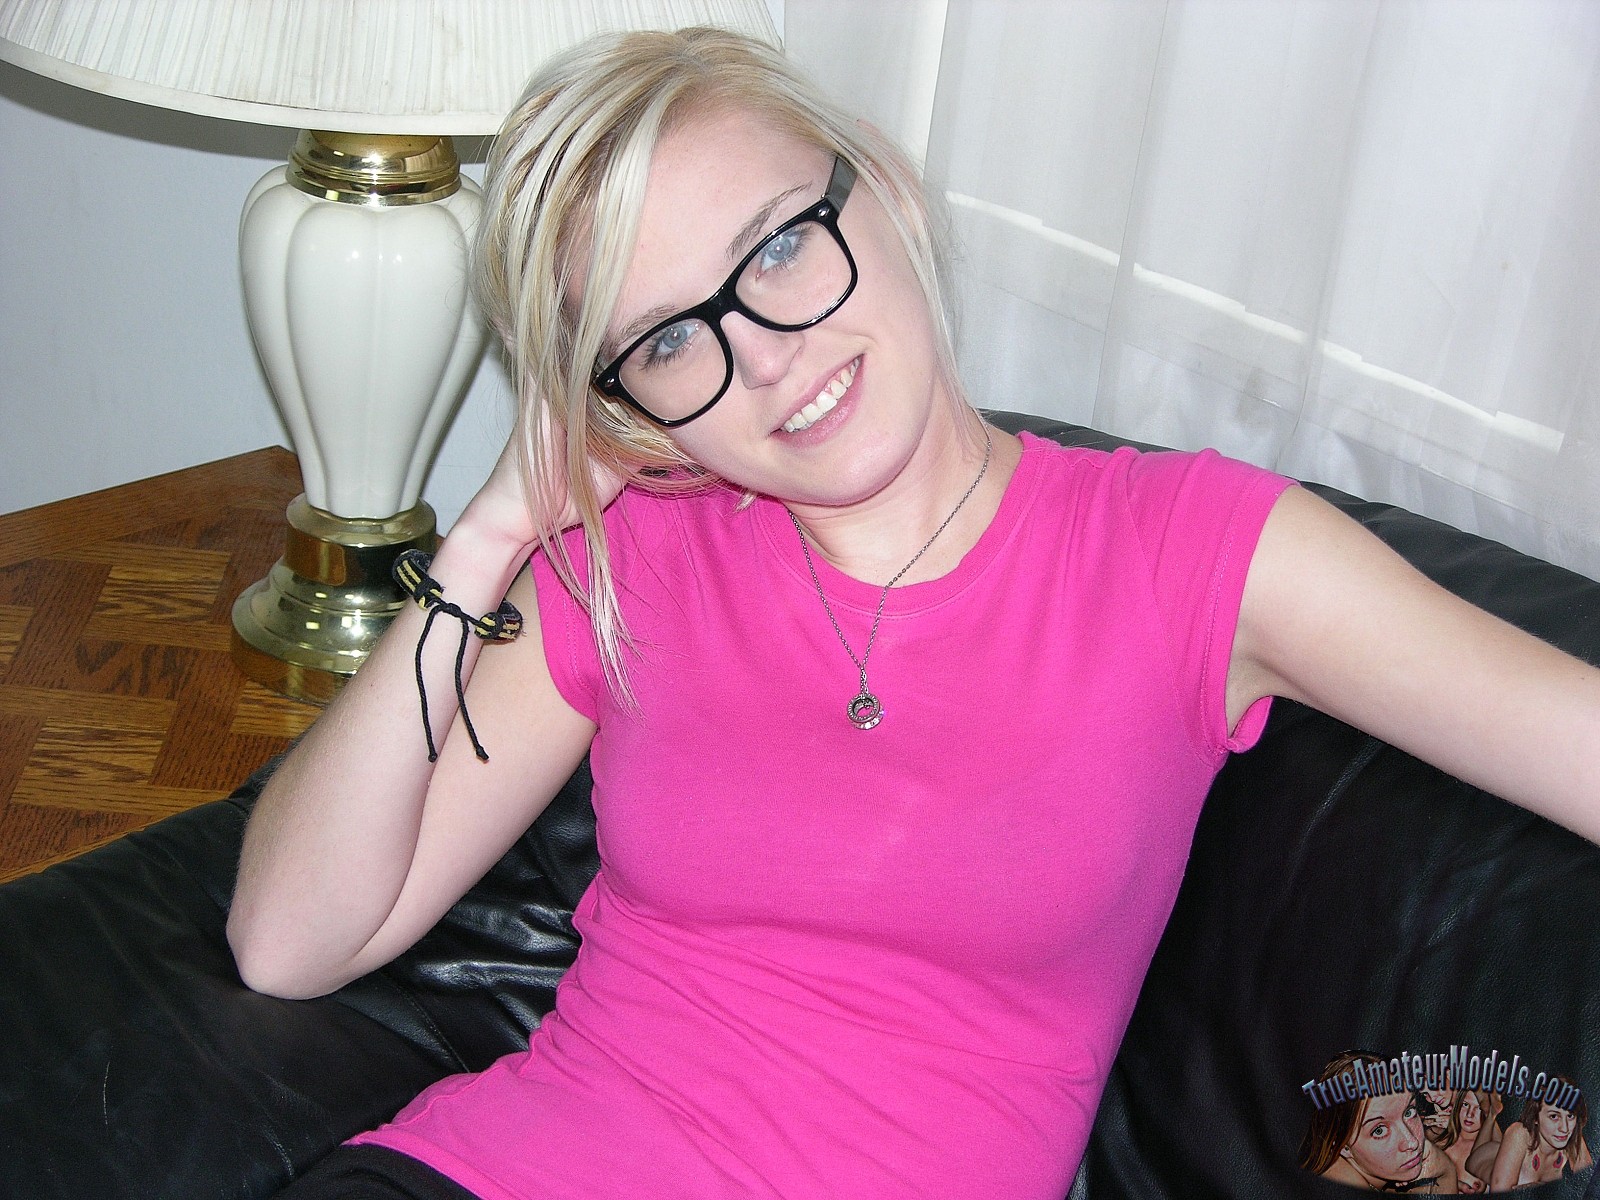 1600px x 1200px - Hot Amateur Blonde Nerd Modeling And Spreading Nude